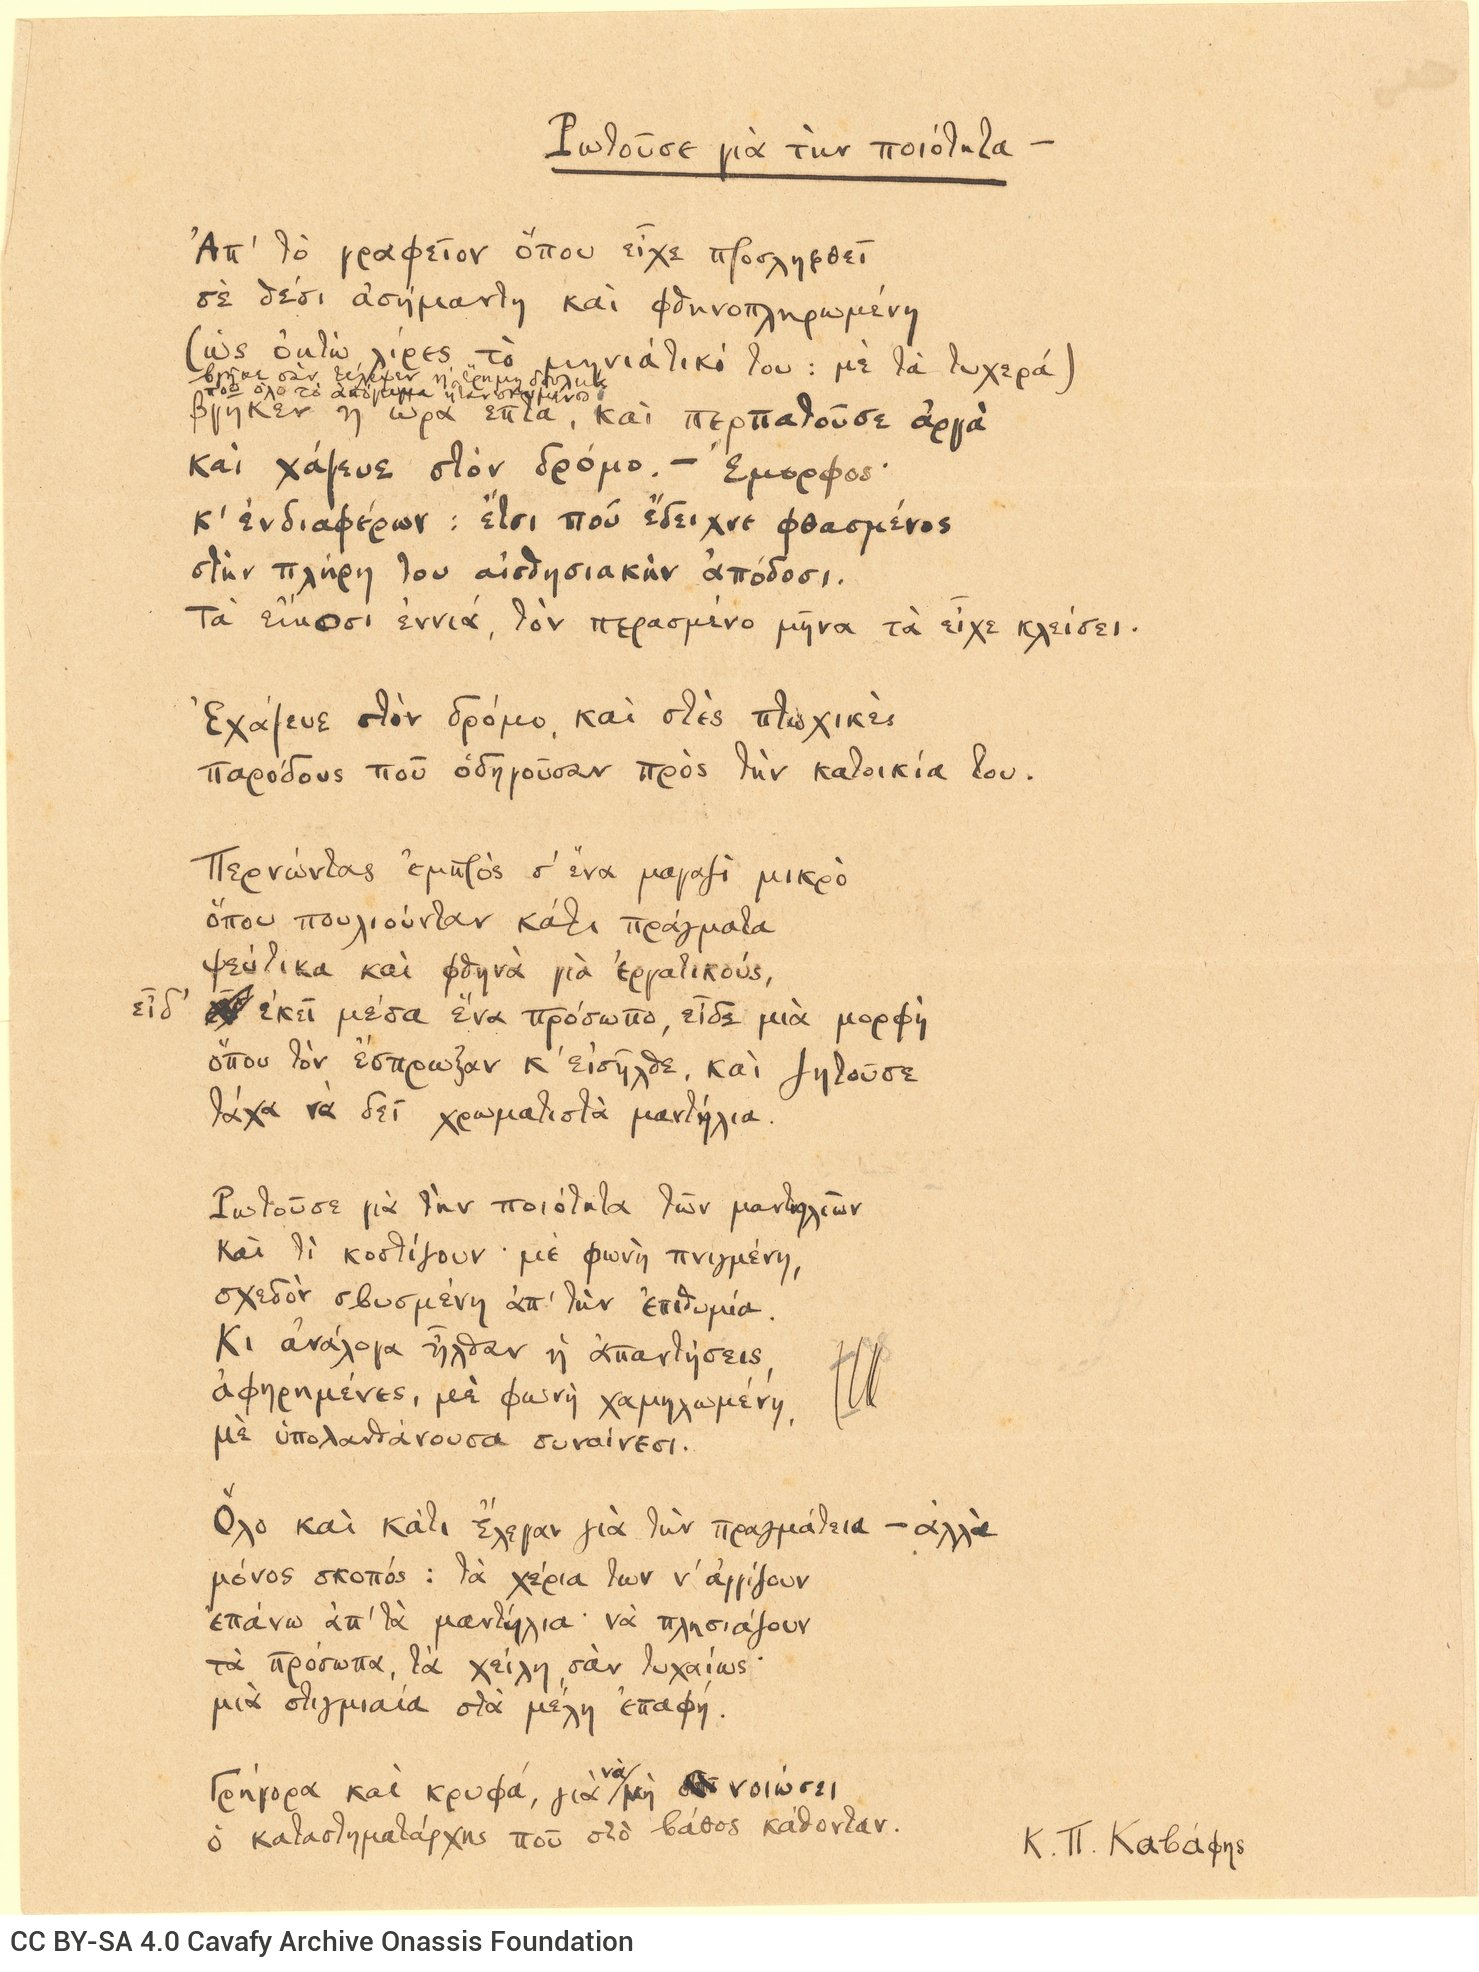 Autograph manuscript poem ("He Asked About the Quality-") on one side of a sheet. Additions, cancellations and emendations